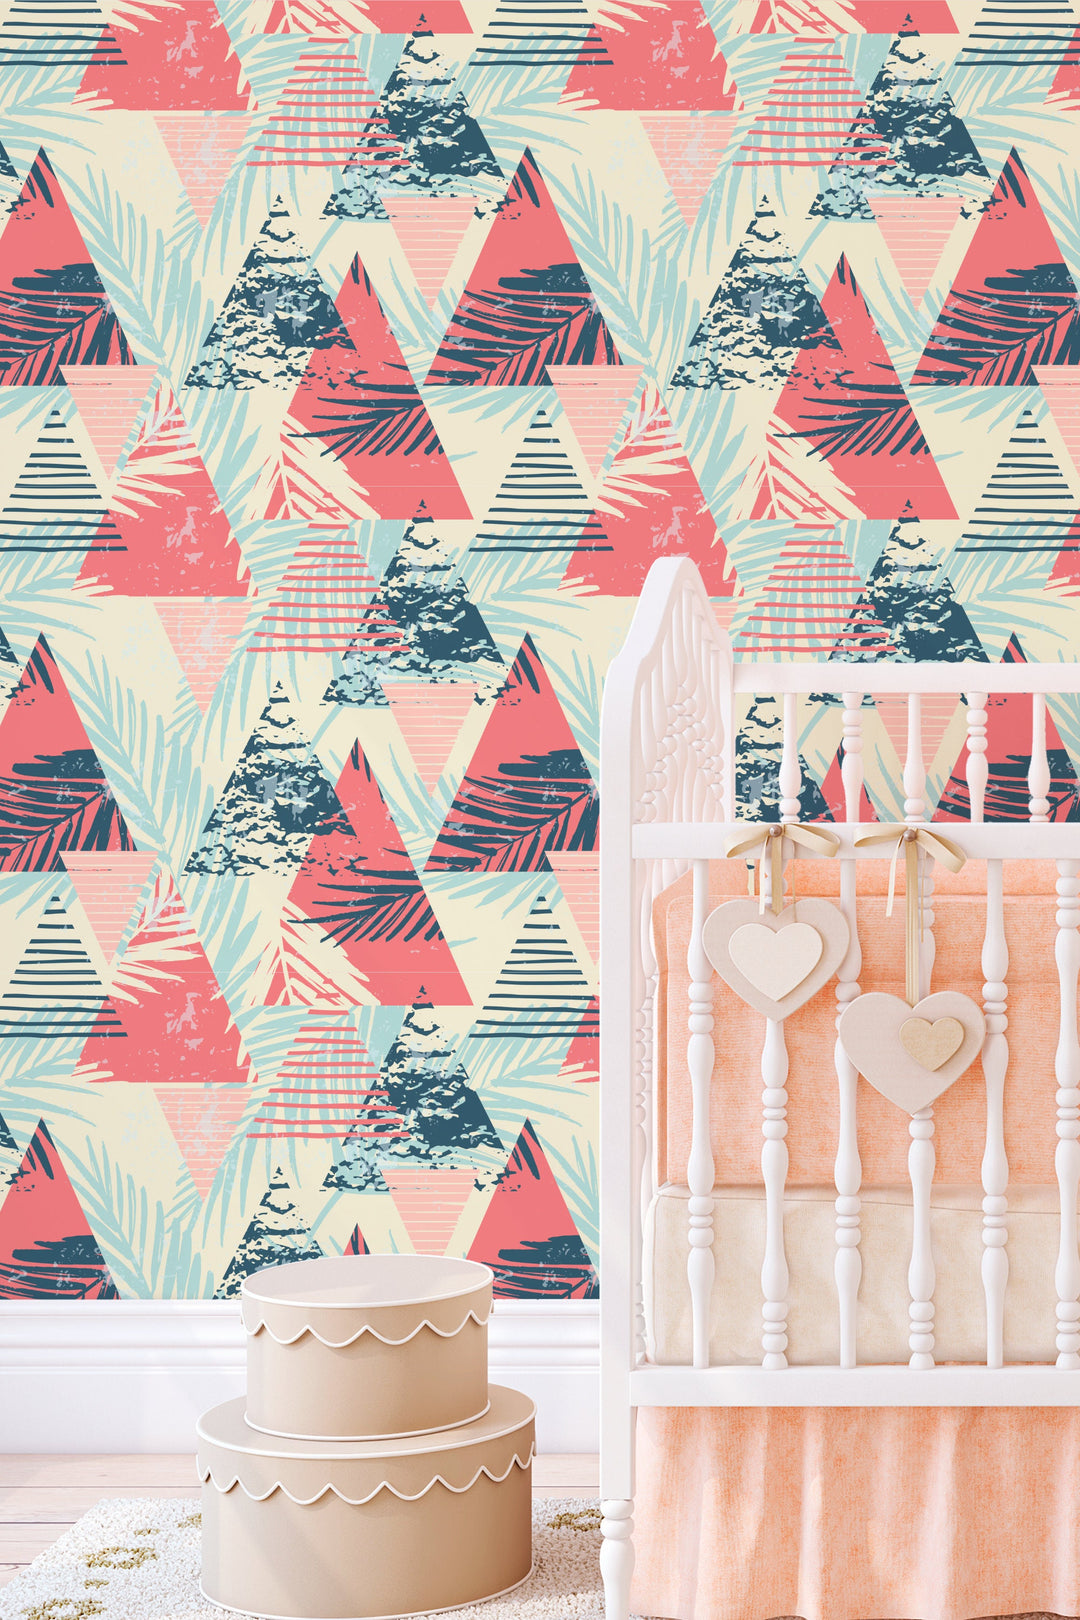 Modern design, multicolor, abstract shapes  -Self Adhesive Traditional Peel and stick wallpaper 53031 /1040